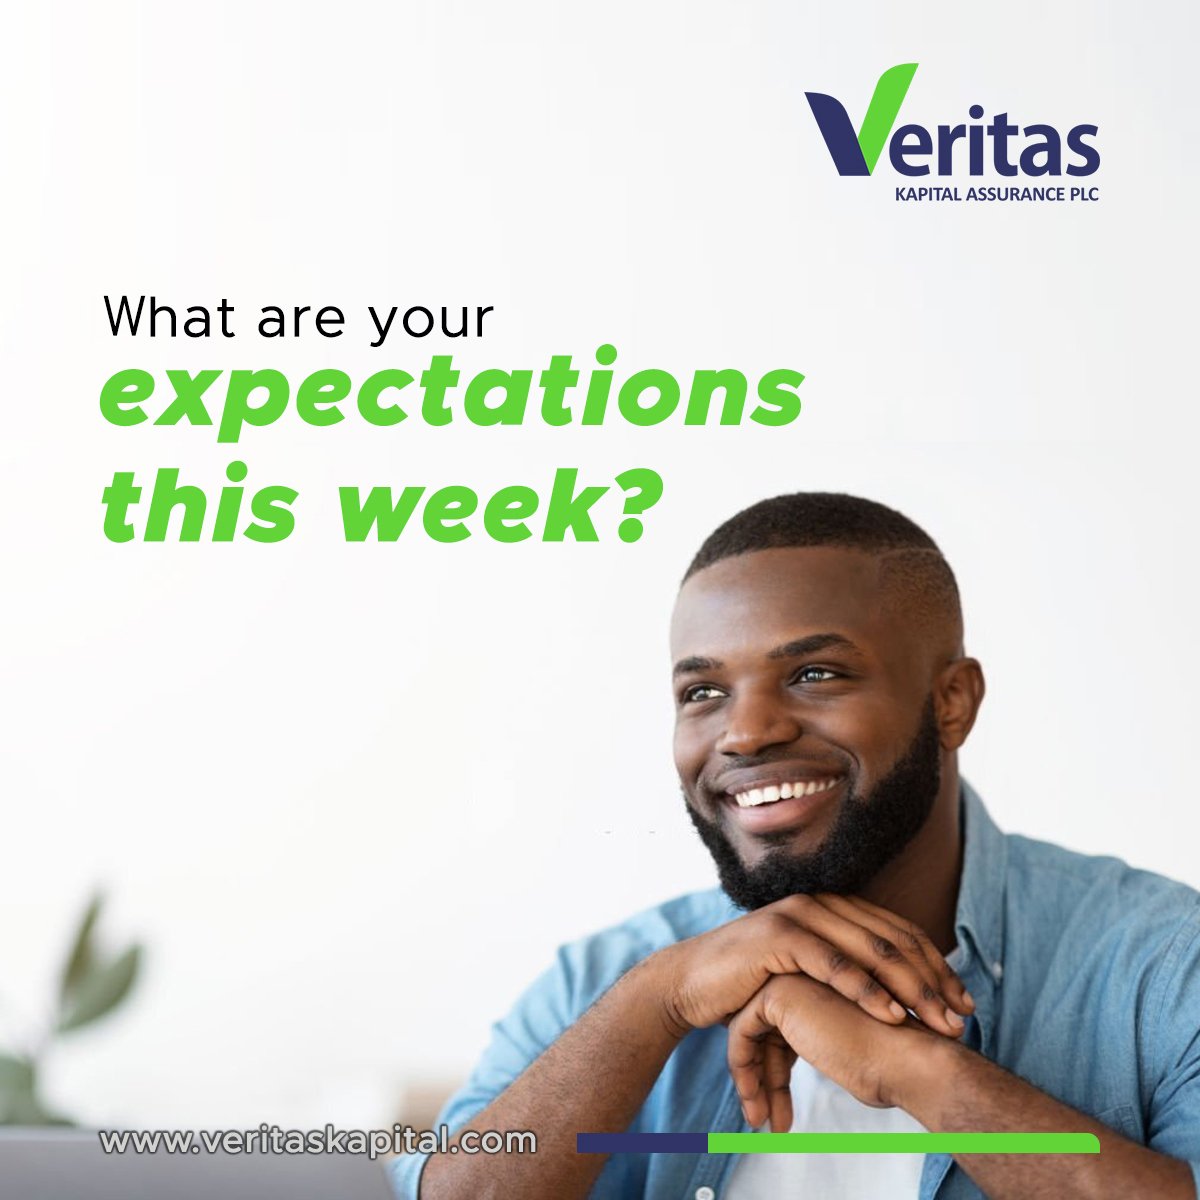 What are your expectations this week?

#mondaythoughts #mondaymotivation #vka #insurance #mondaymood #vkacares